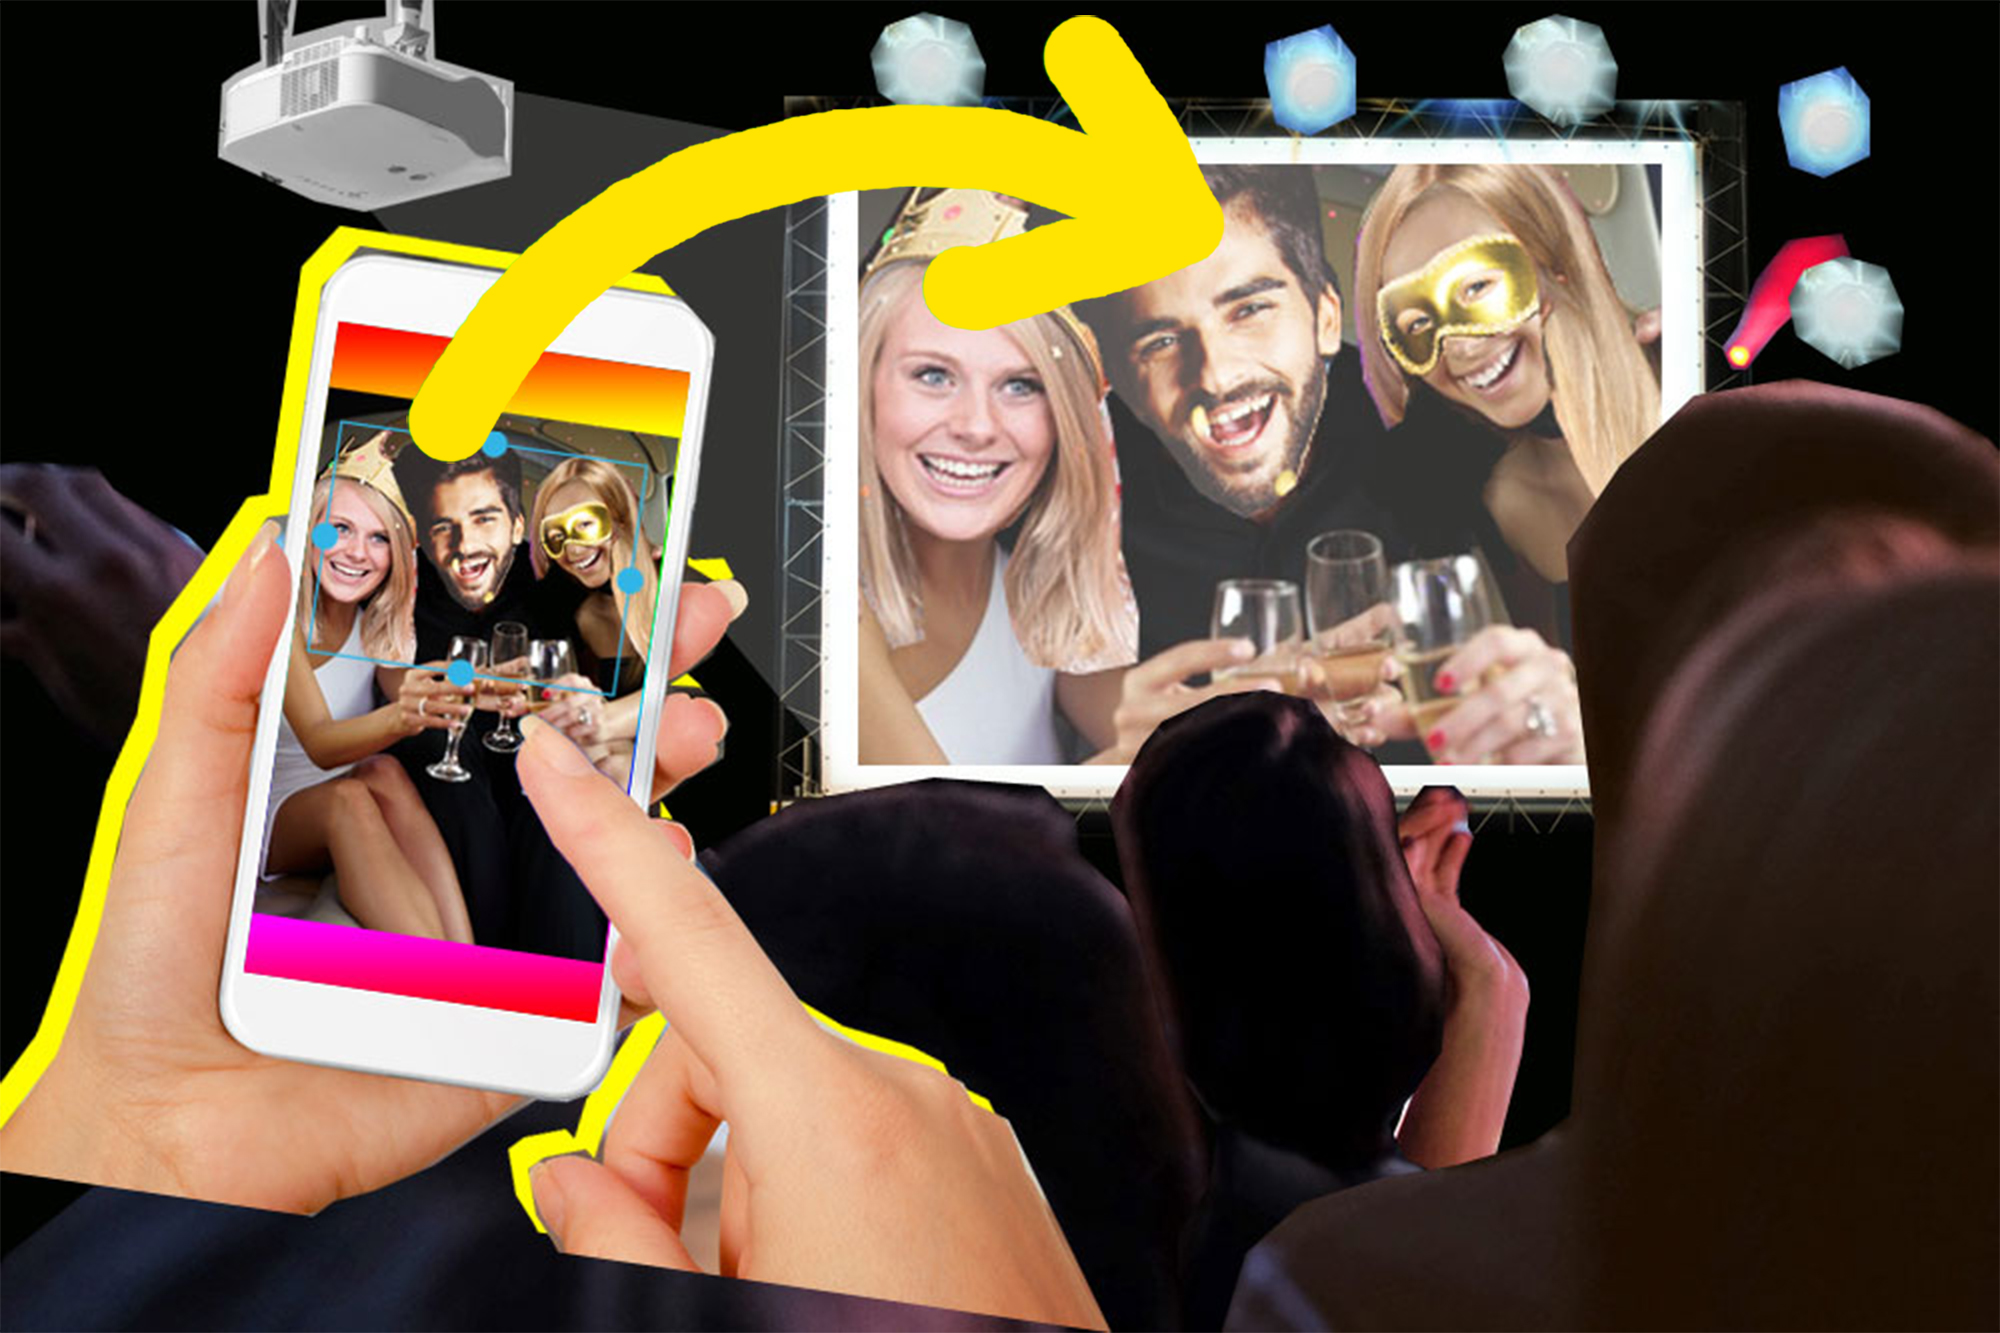 The virtual photo and text message wall for teambuilding events and parties.